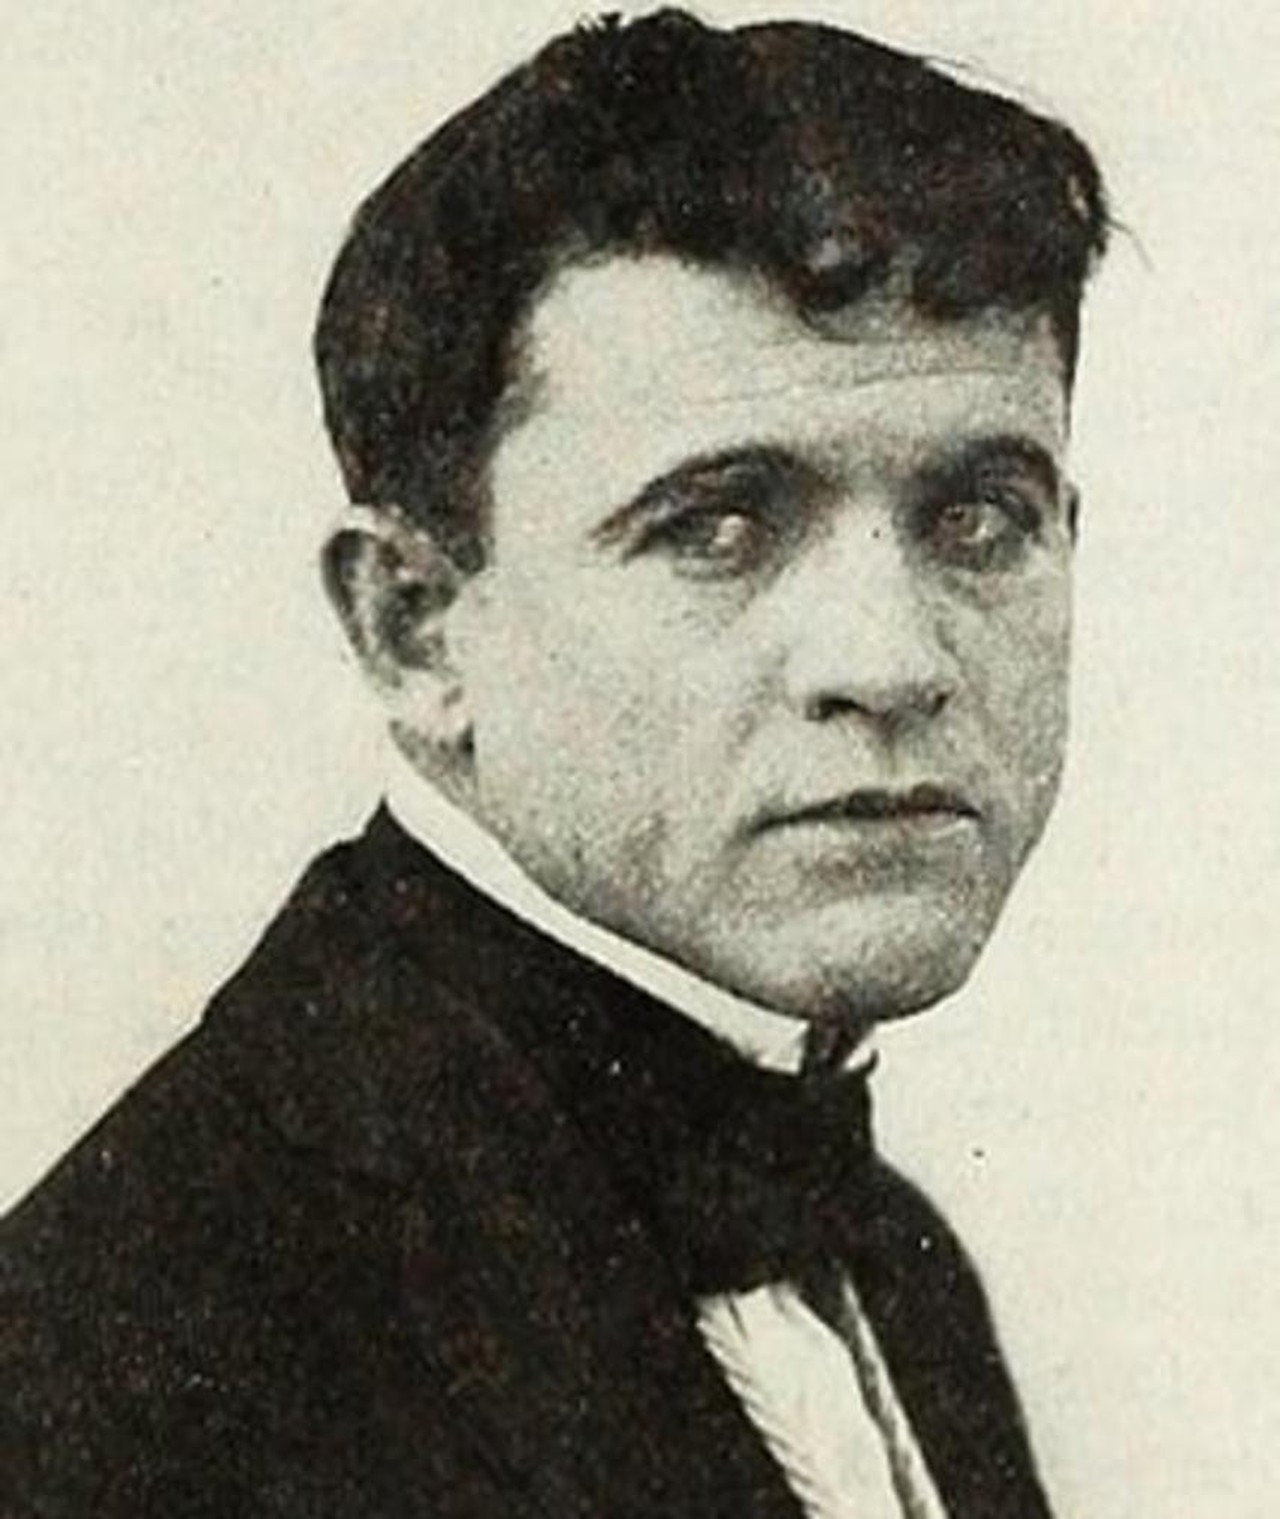 Photo of Elmer Booth